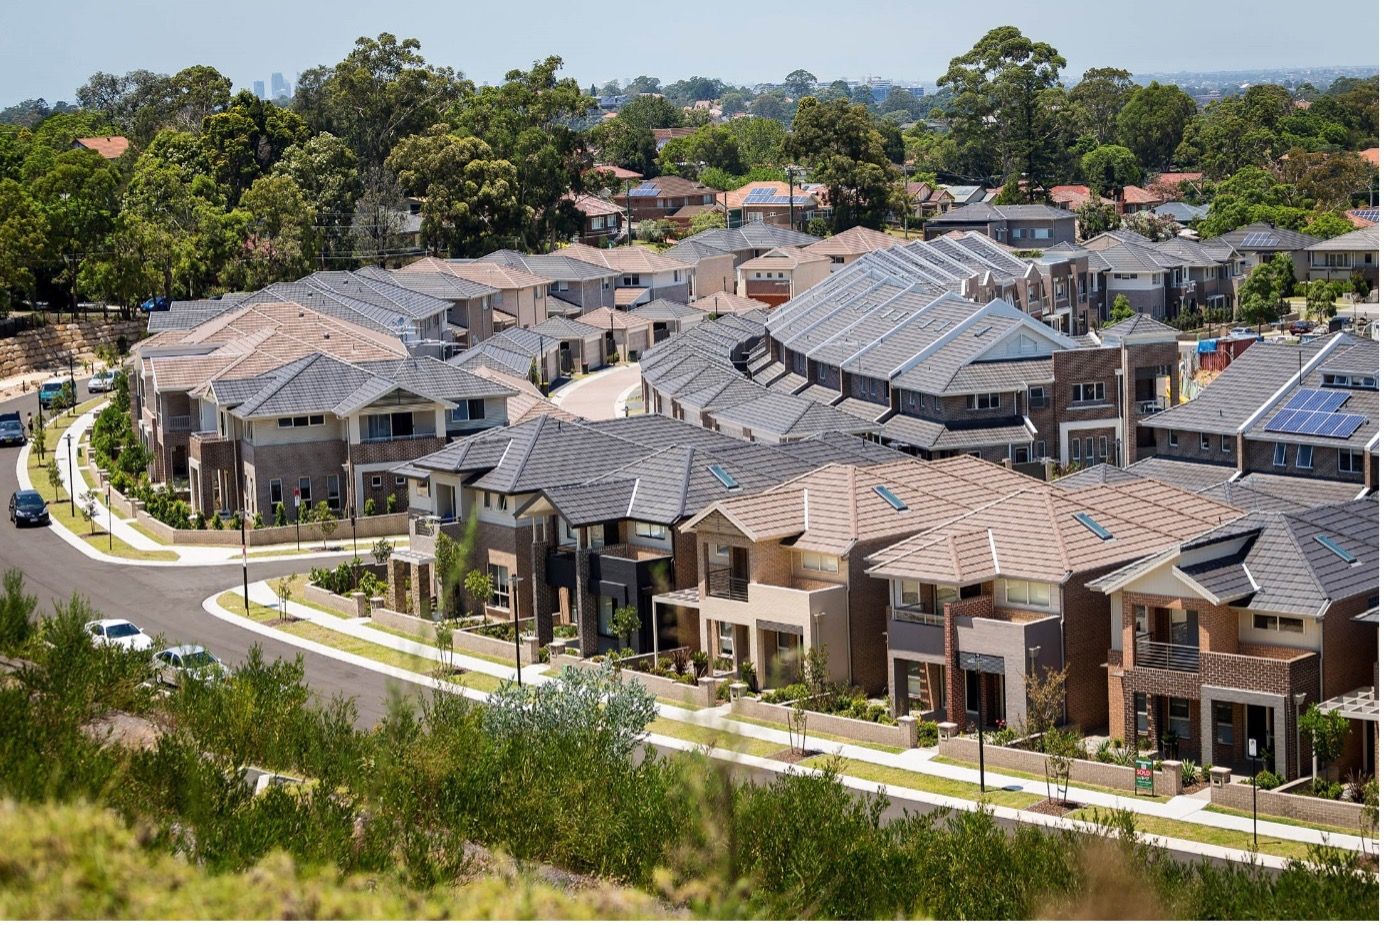 Australia’s Housing Price Rise for a Second Consecutive Month